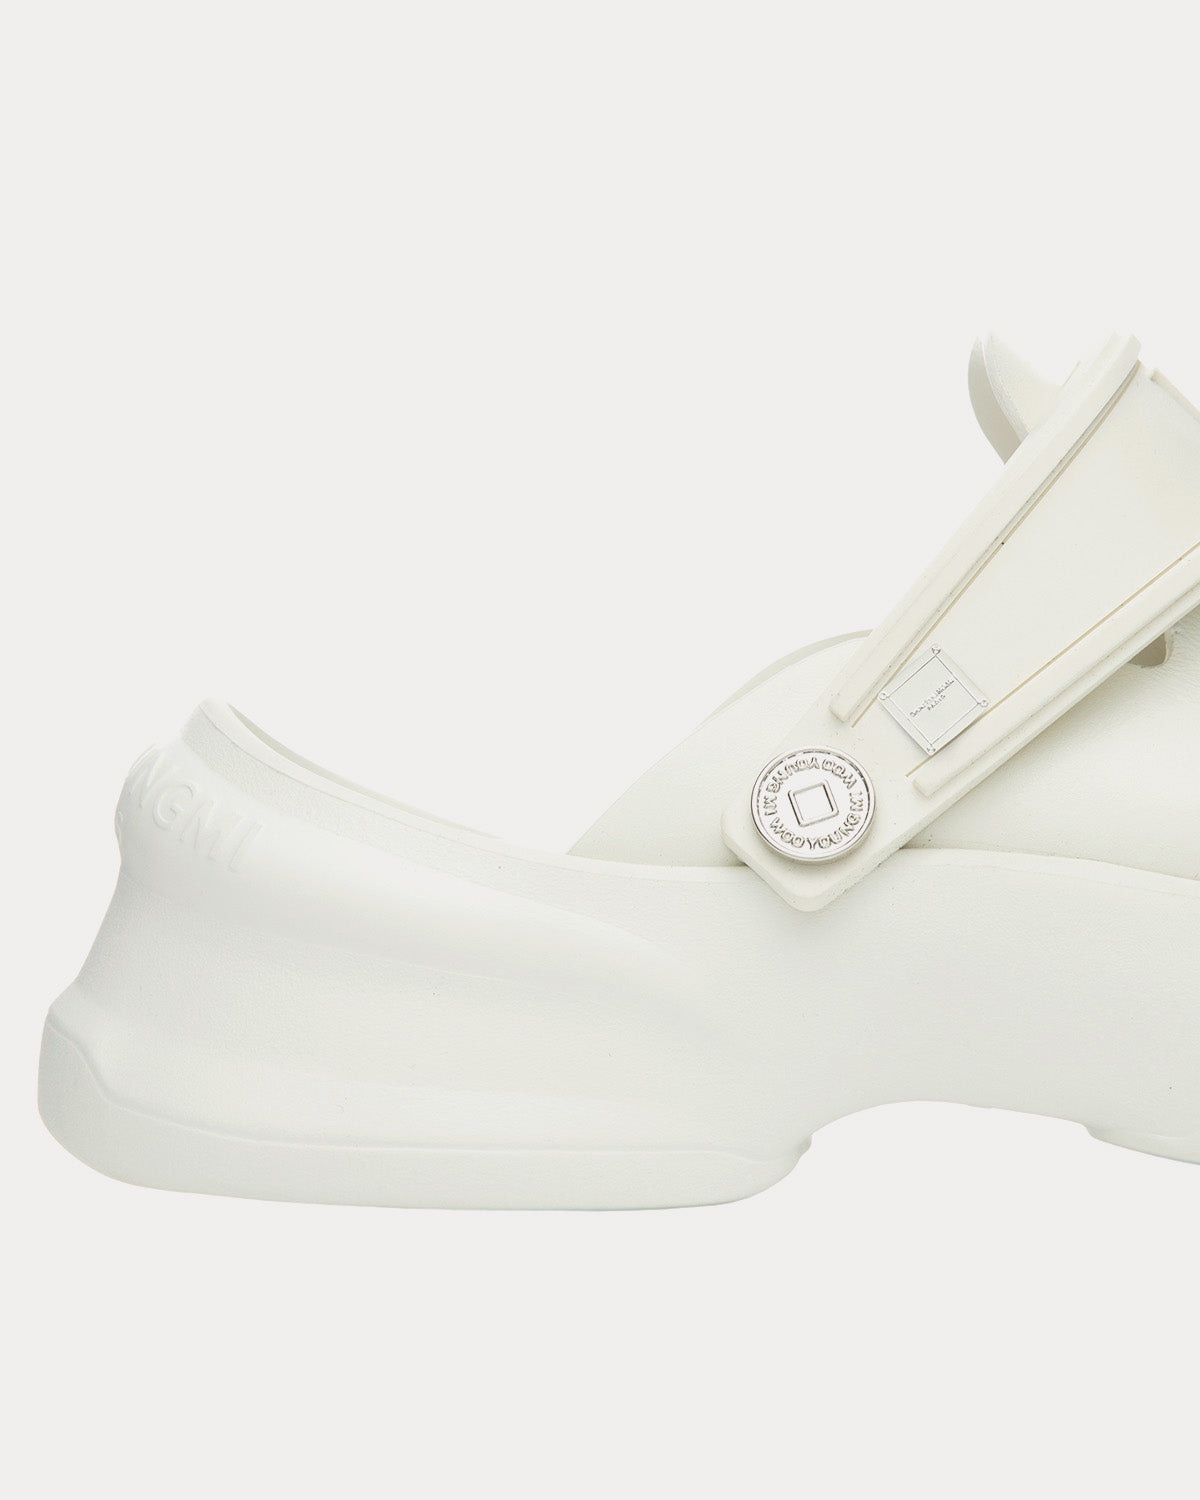 Wooyoungmi - Slingback Leather White Clogs